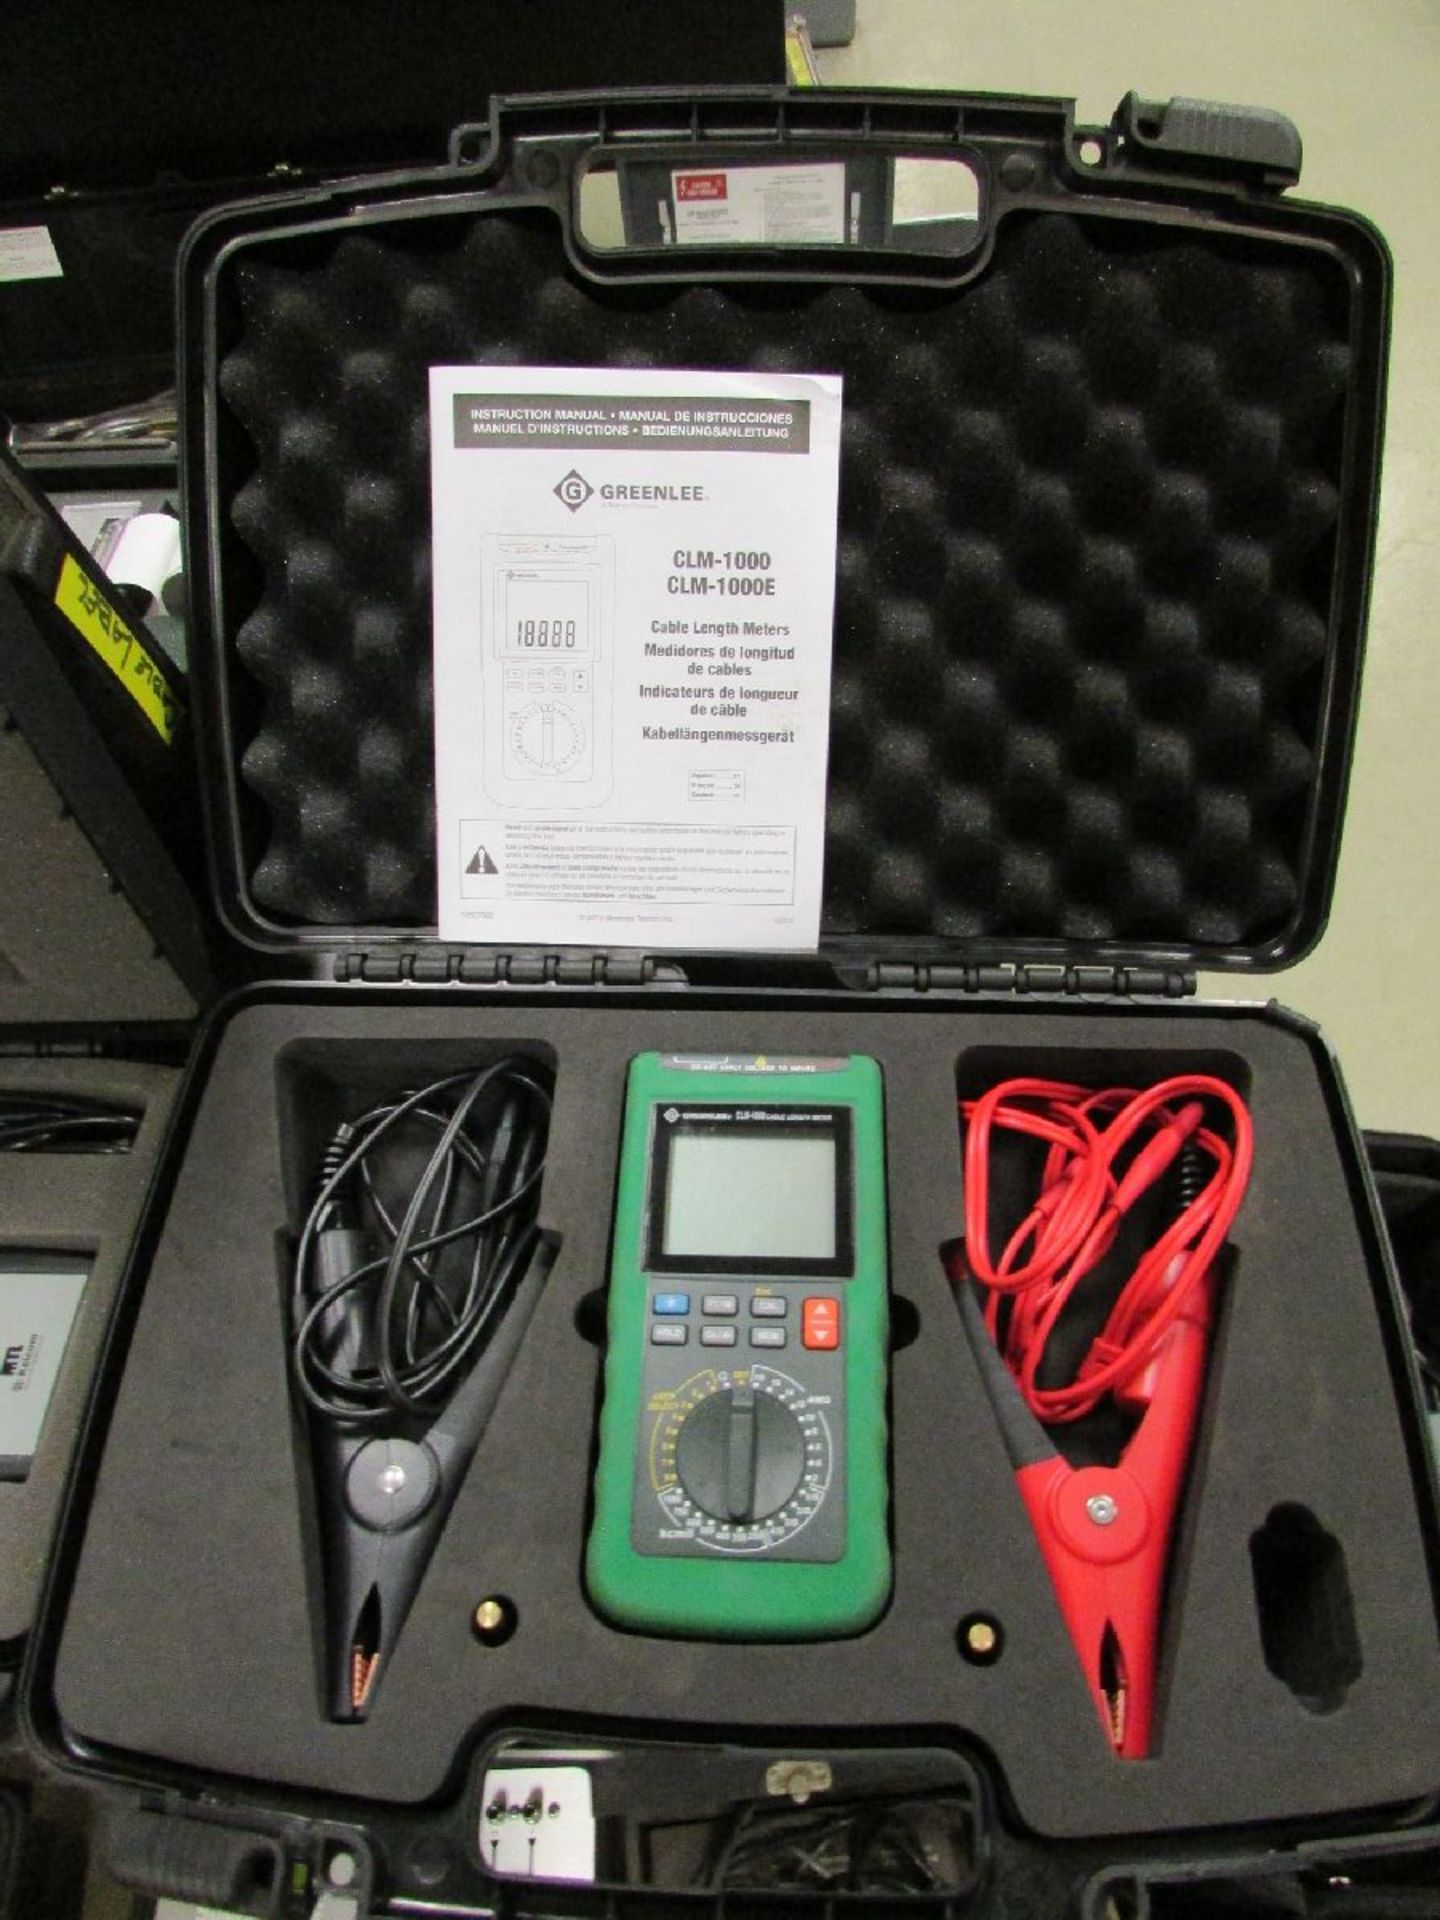 Greenlee Model CLM-1000 Cable Length Meter